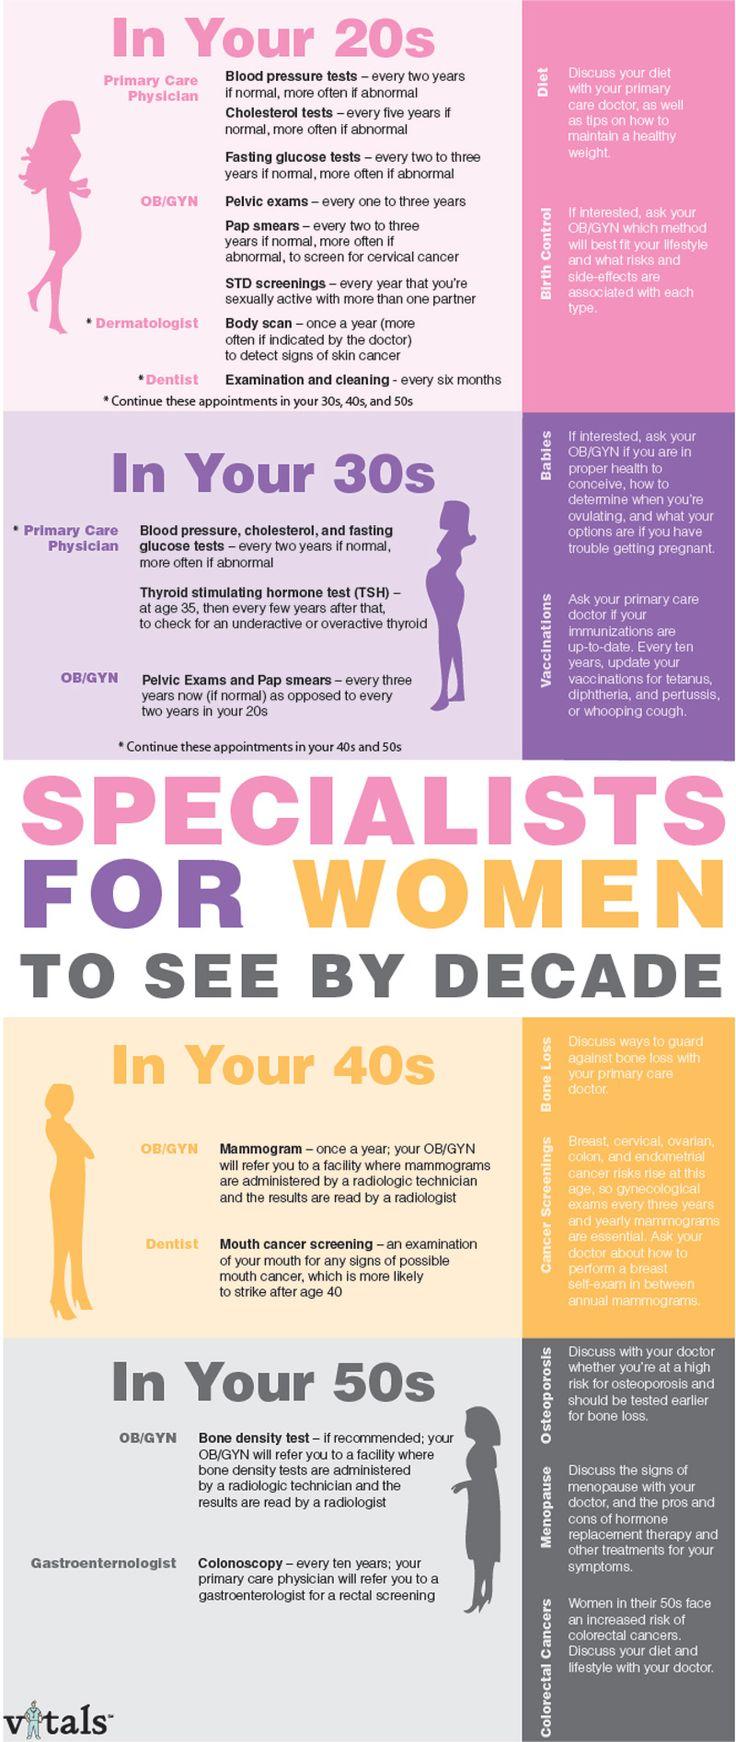 Wedding - INFOGRAPHIC: The Most Important Doctors To See In Your 20s, 30s, 40s And 50s